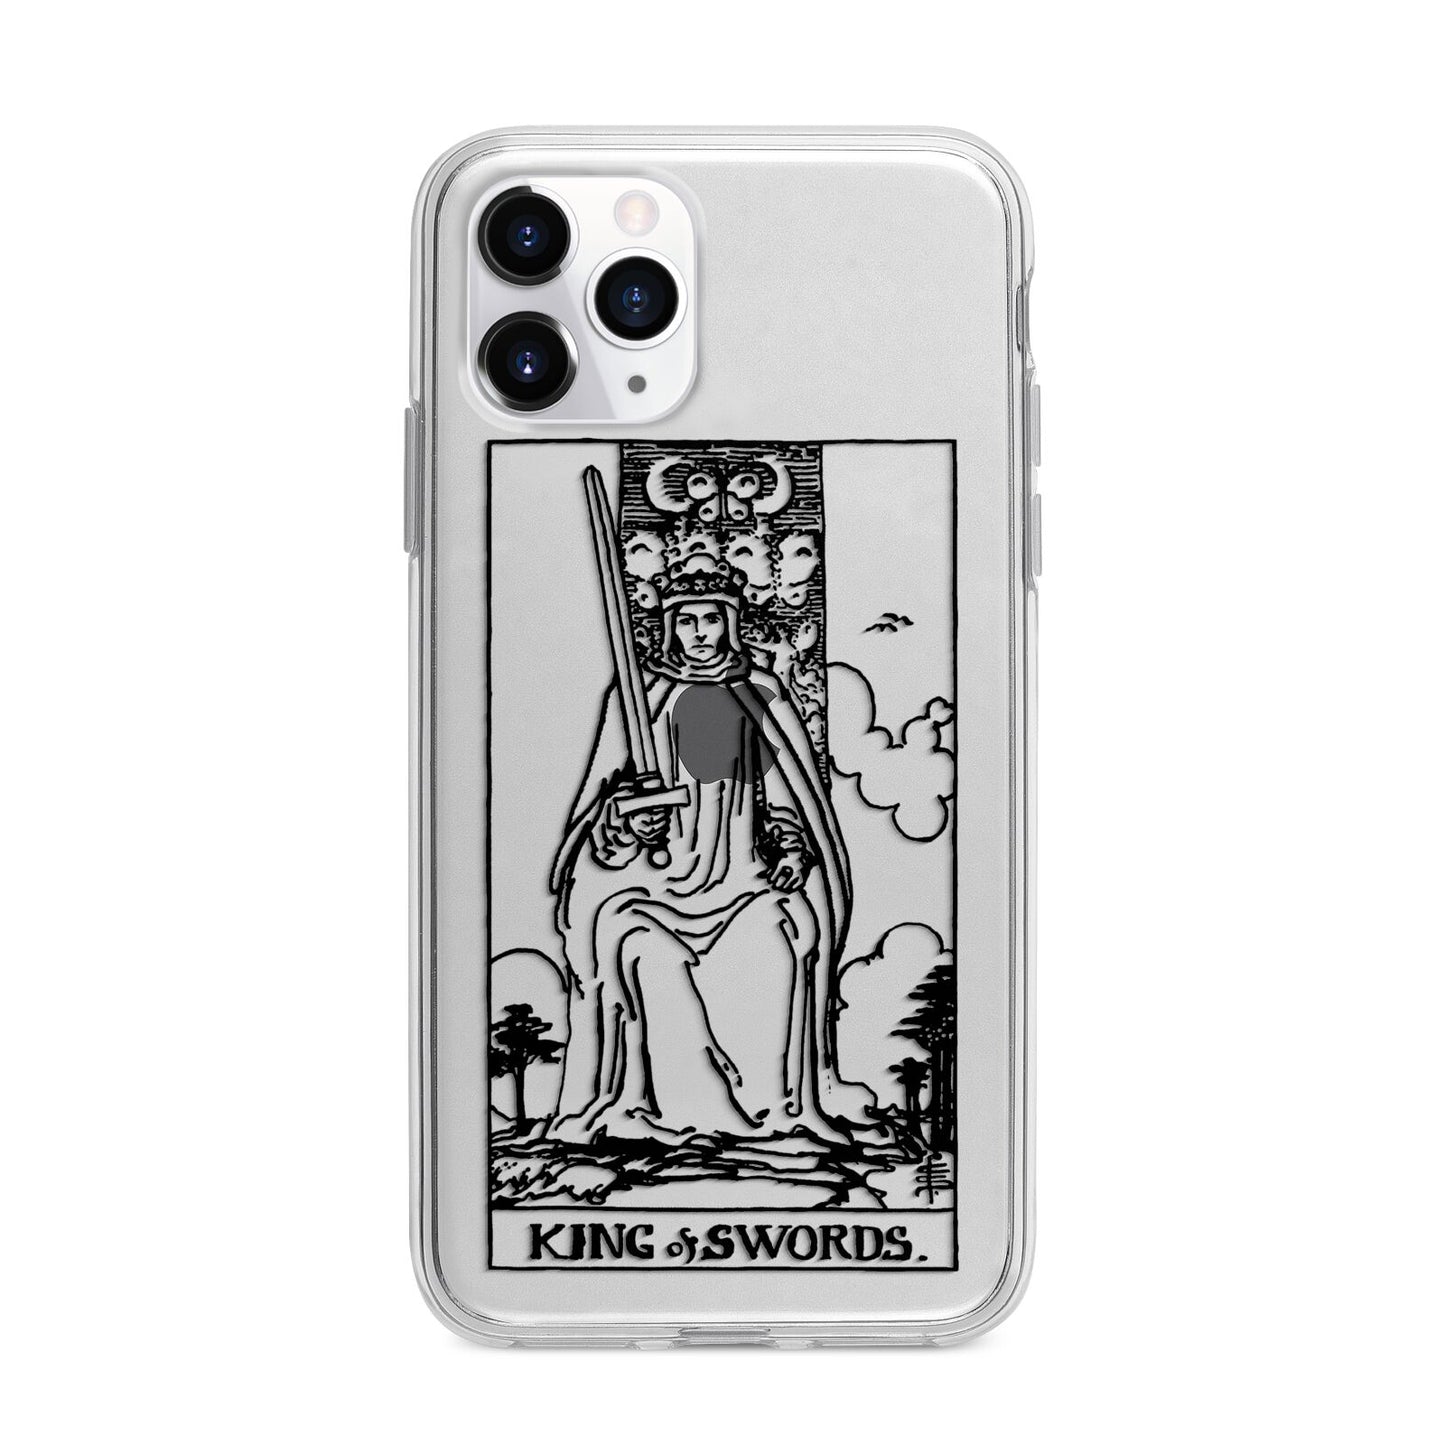 King of Swords Monochrome Apple iPhone 11 Pro in Silver with Bumper Case